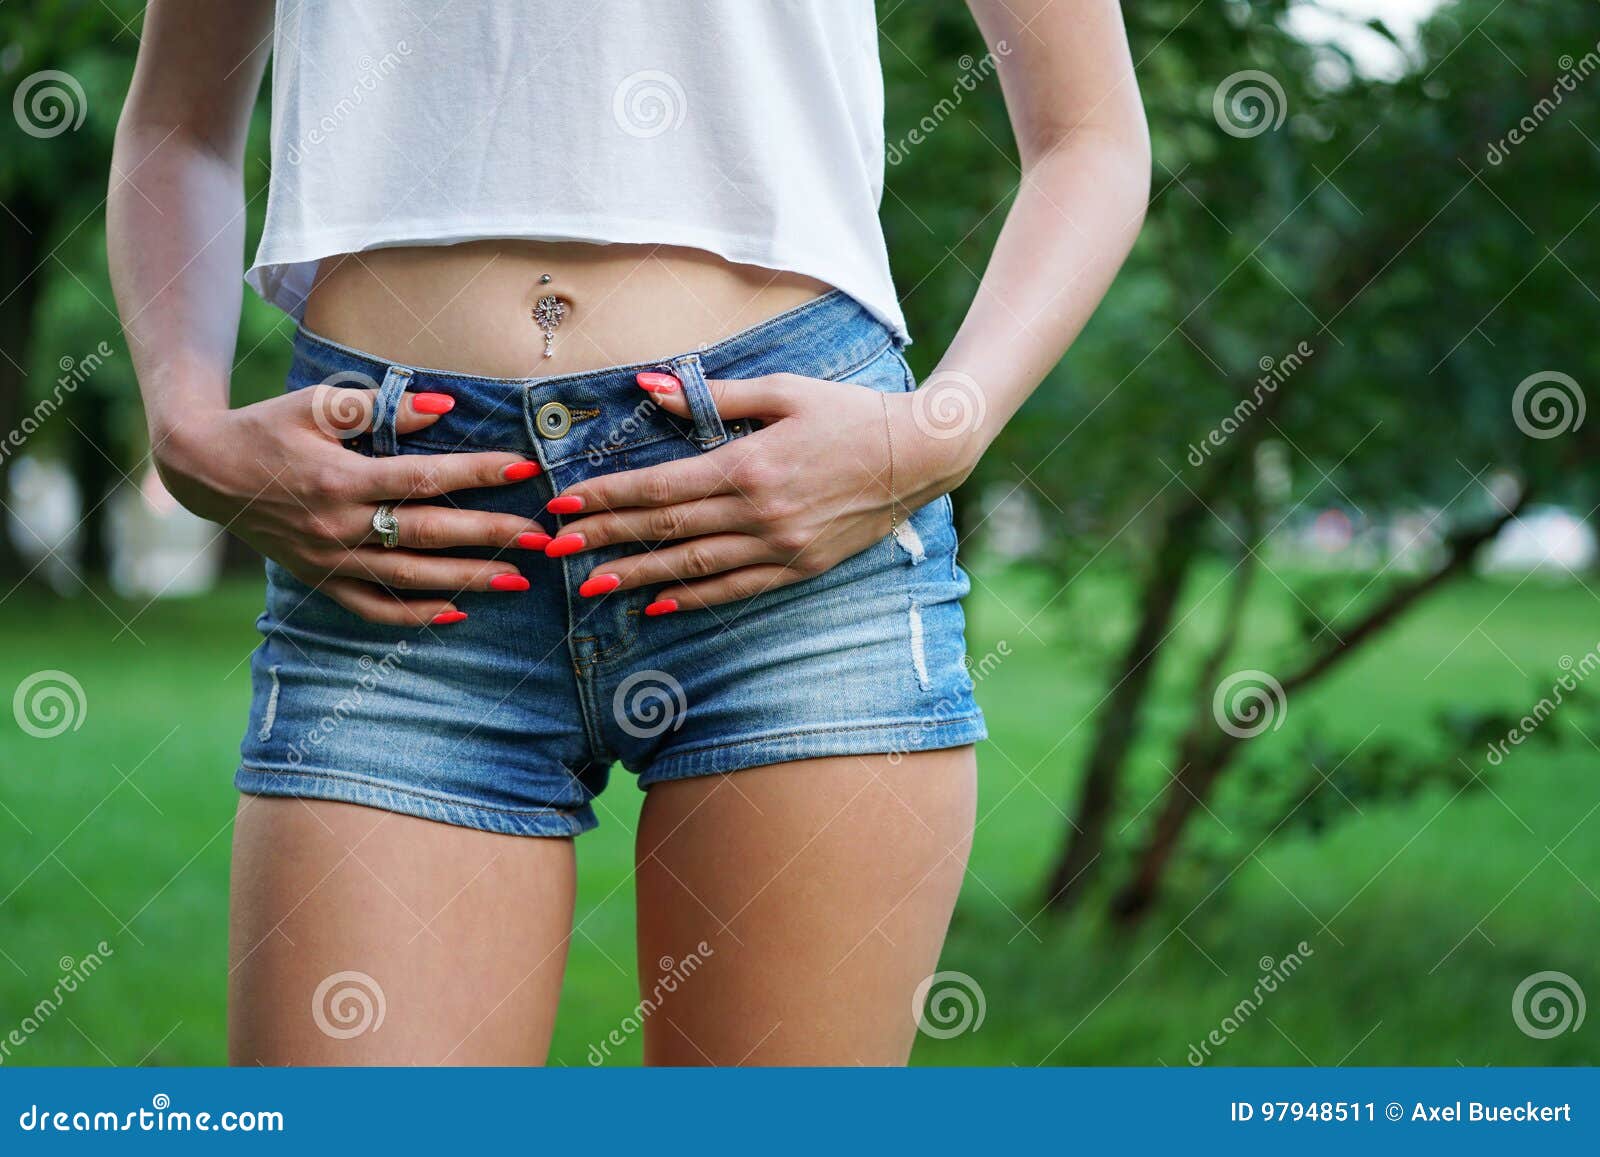 Hot Pants or Booty Shorts Fashion Trend Stock Image - Image of